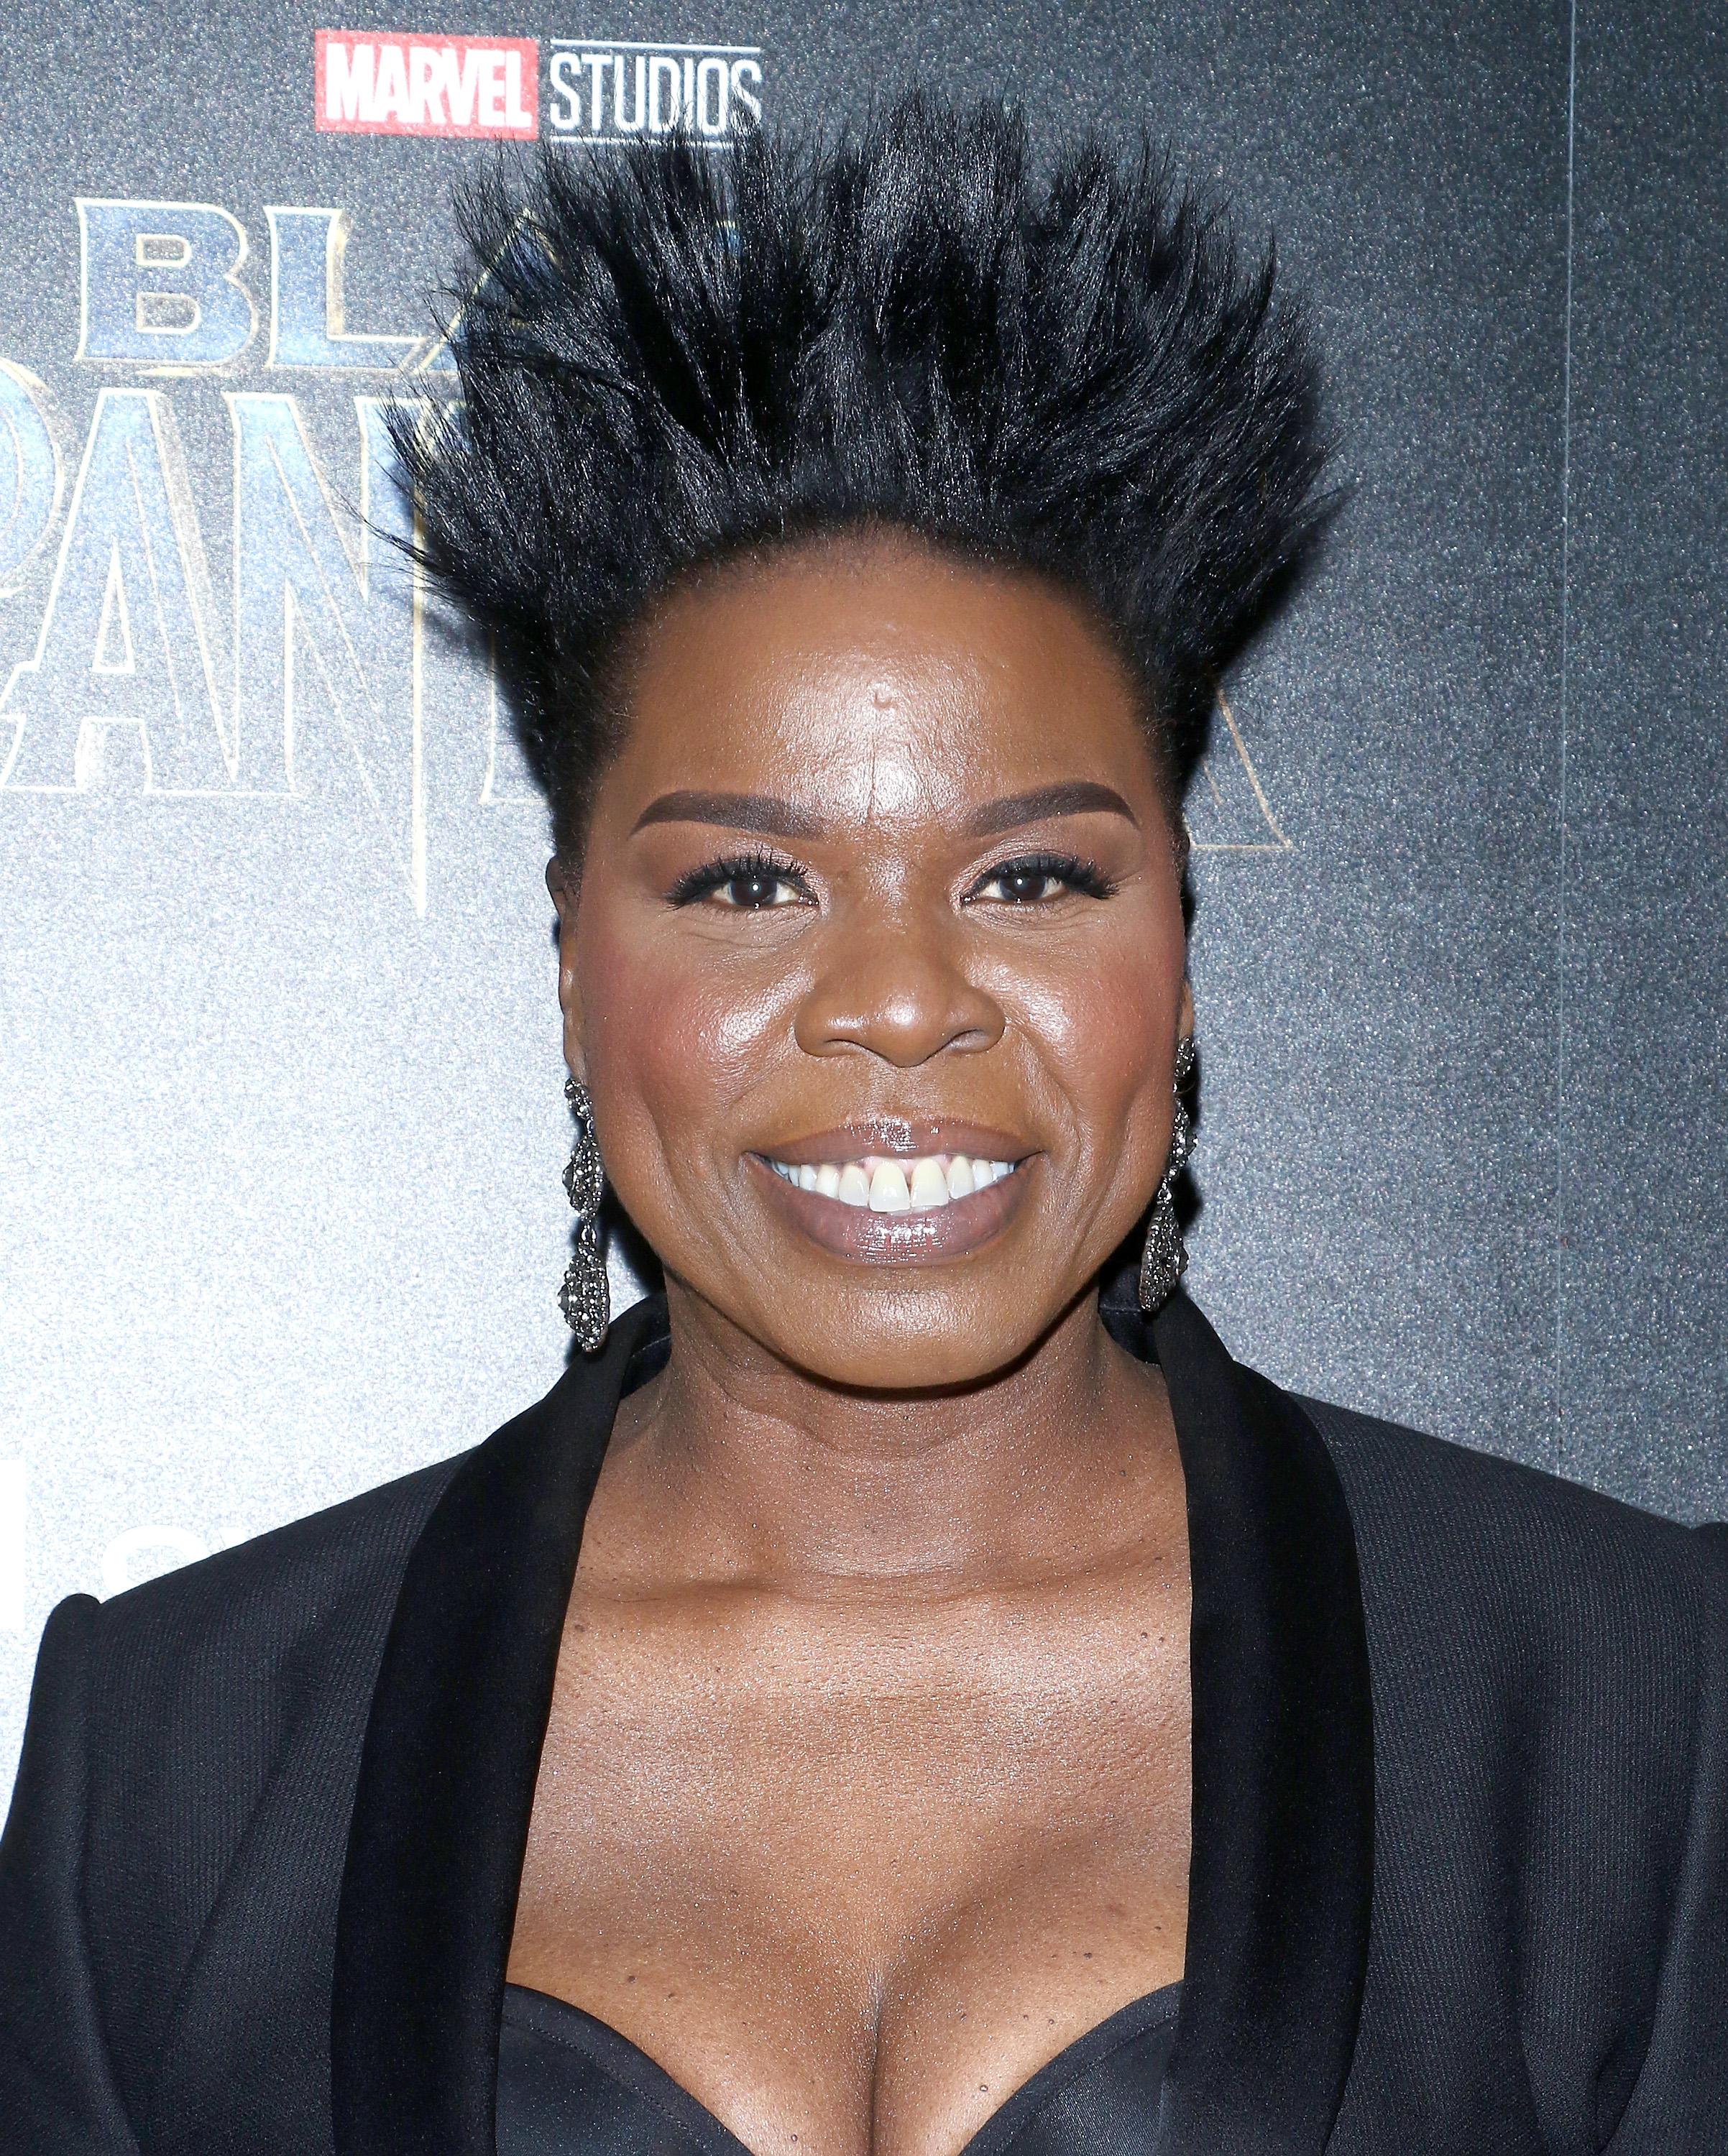 Who Is Leslie Jones Dating? Inside The Comedienne's Love Life